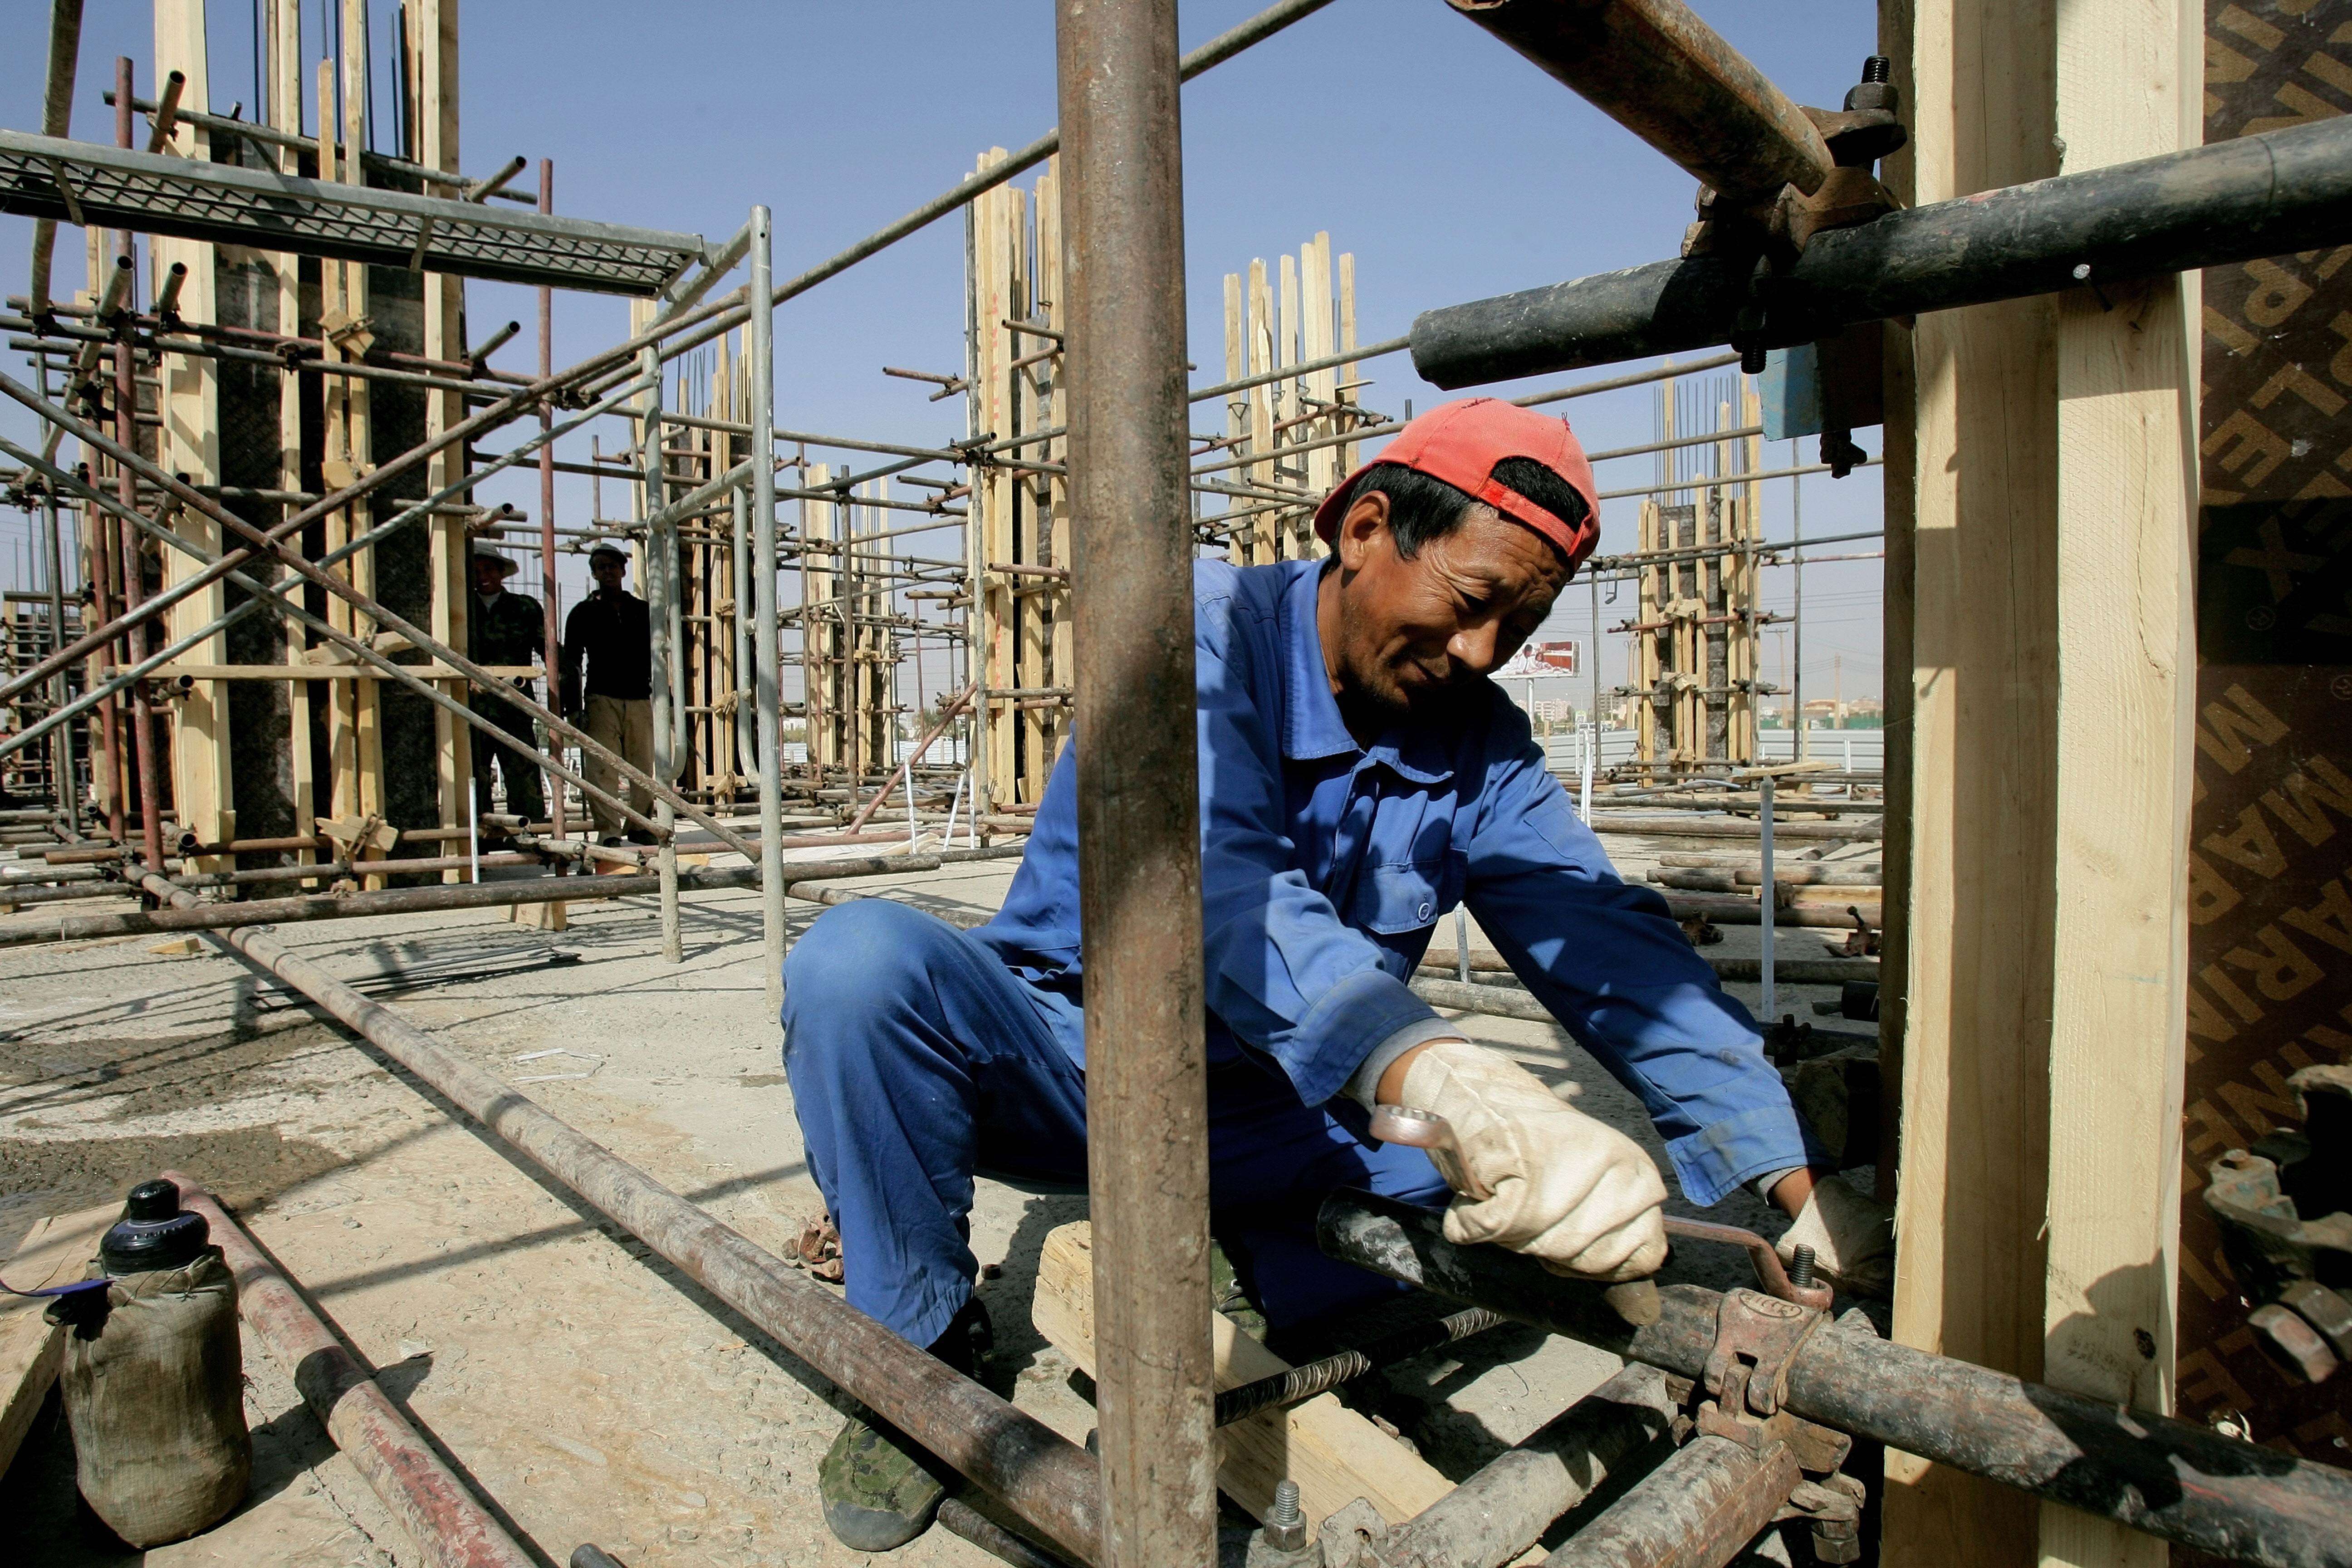 A Chinese worker fixes pipes at a construction site in Sudan’s capital Khartoum in February 2012. China is a major funder of infrastructure projects in Africa. Photo: AFP